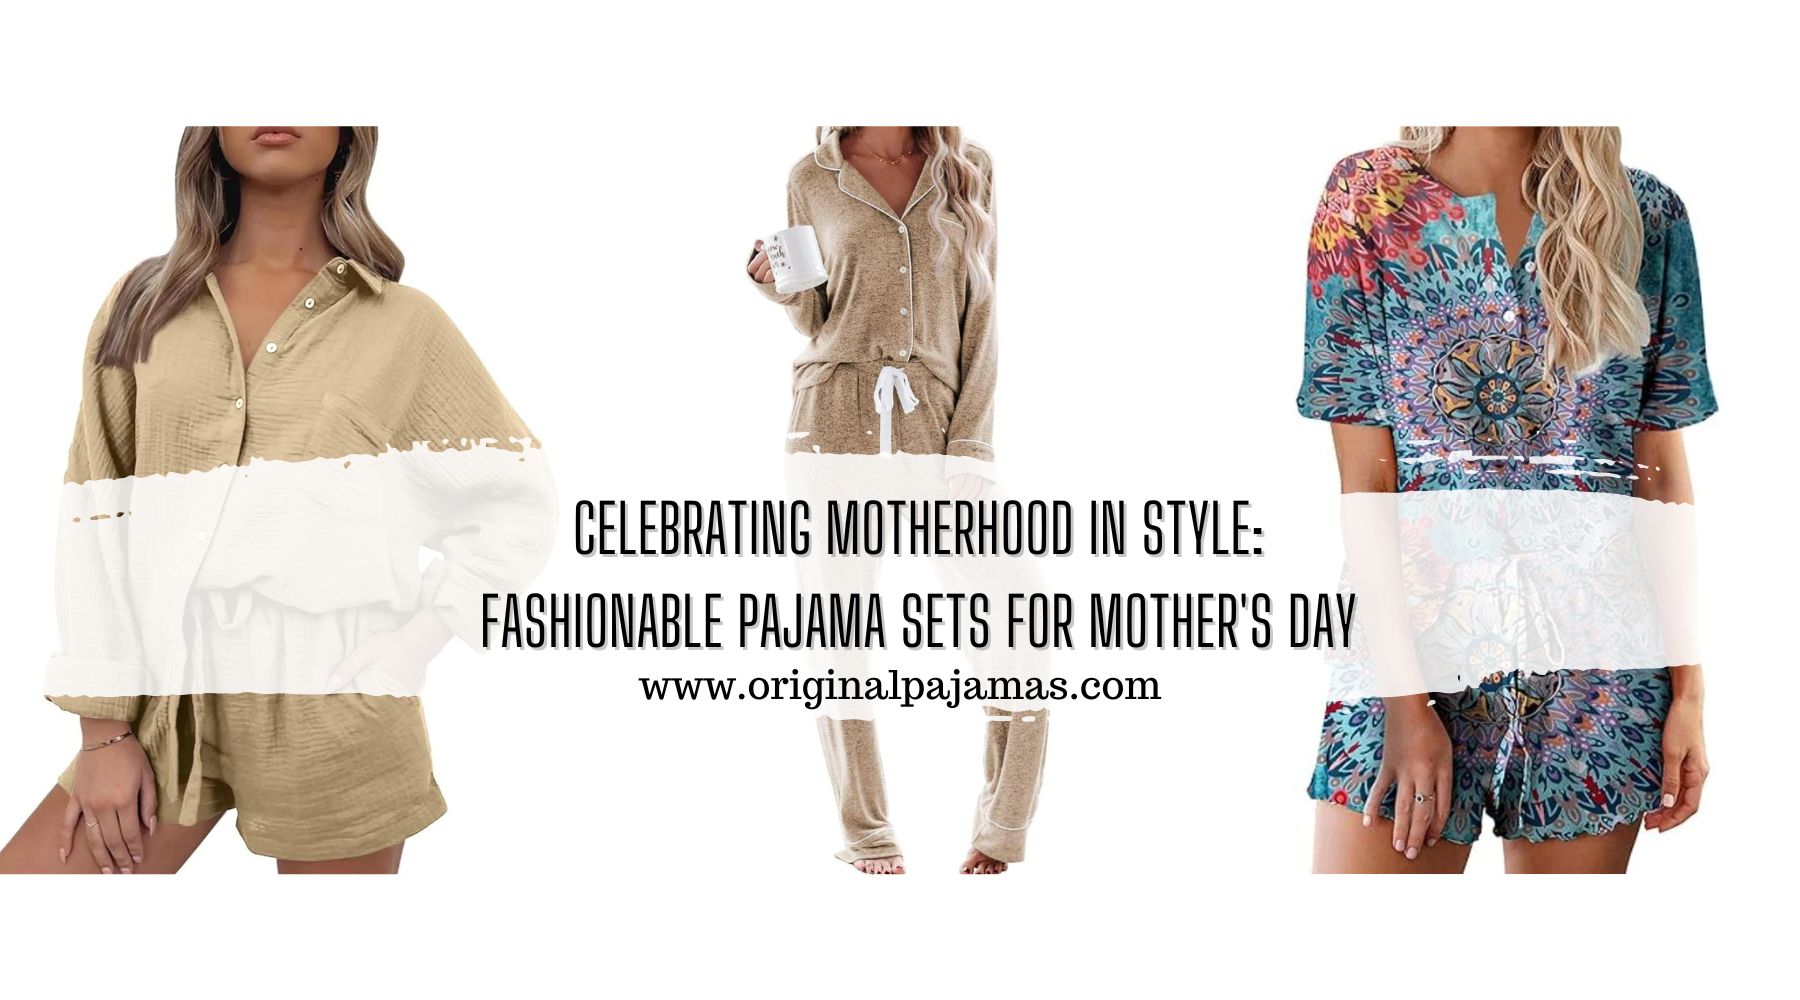 Celebrating Motherhood in Style: Fashionable Pajama Sets for Mother's Day